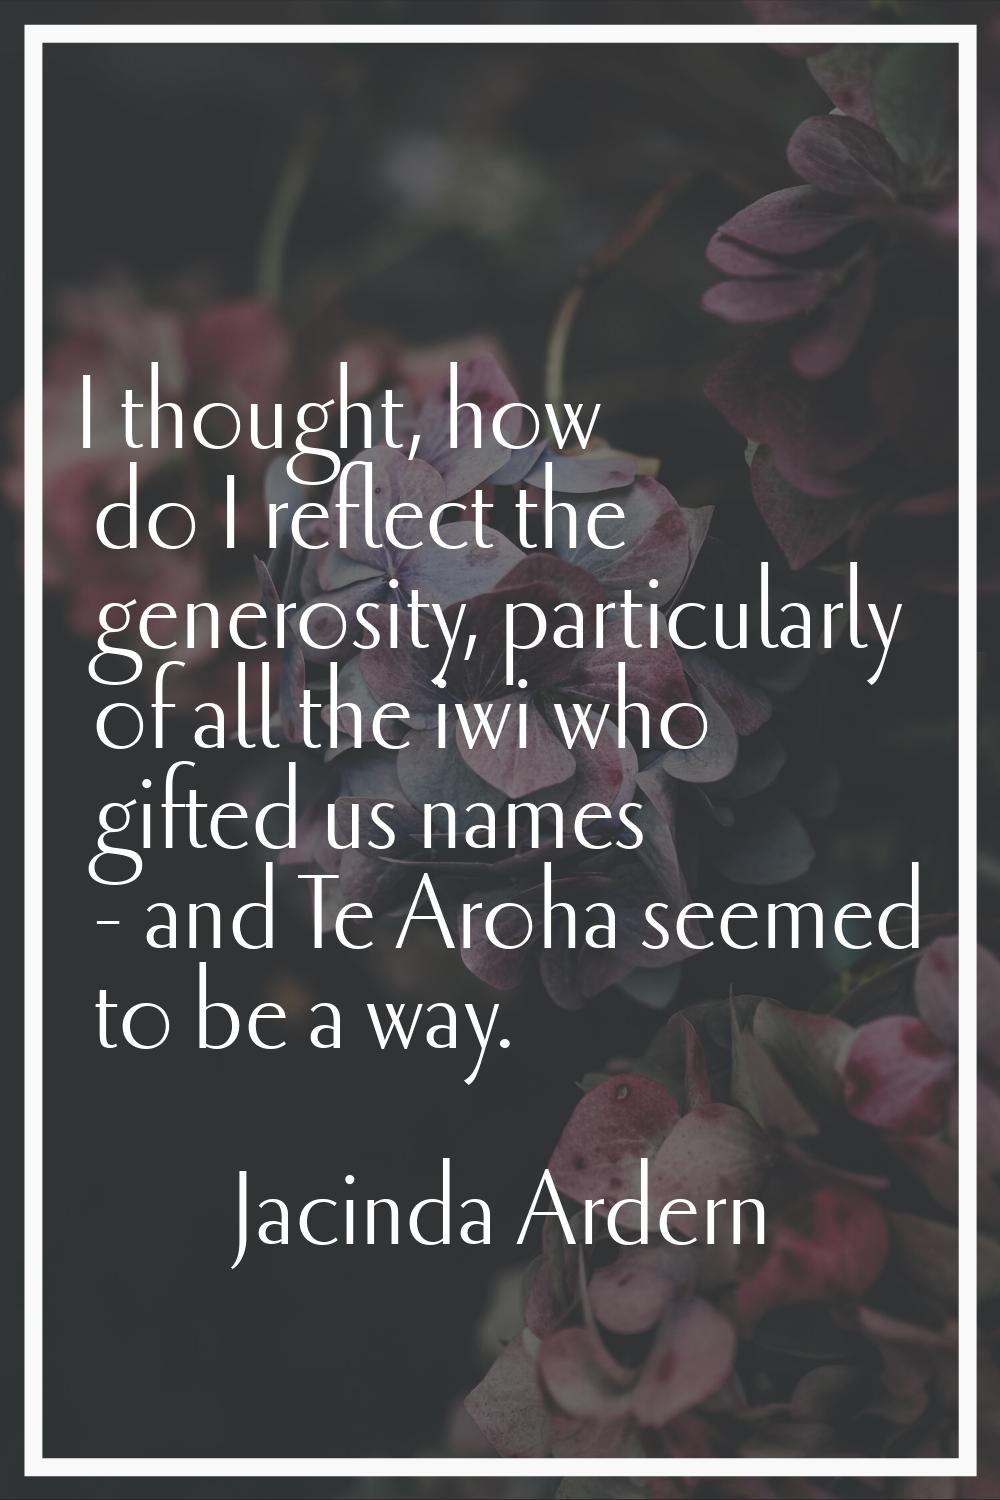 I thought, how do I reflect the generosity, particularly of all the iwi who gifted us names - and T